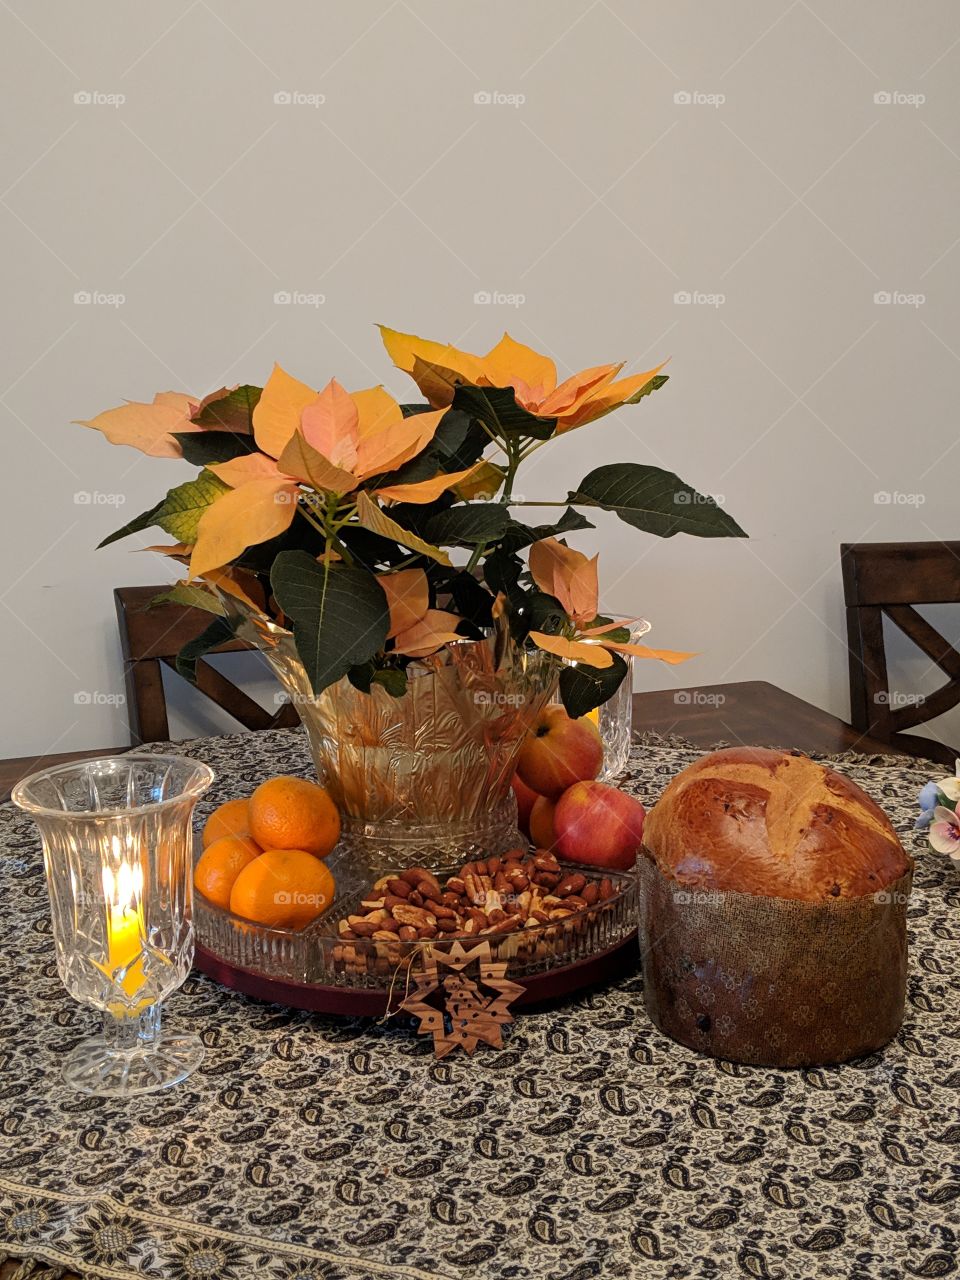 Coral poinsettia Christmas still life. Clementines nuts and panettone bread. Christmas snacks